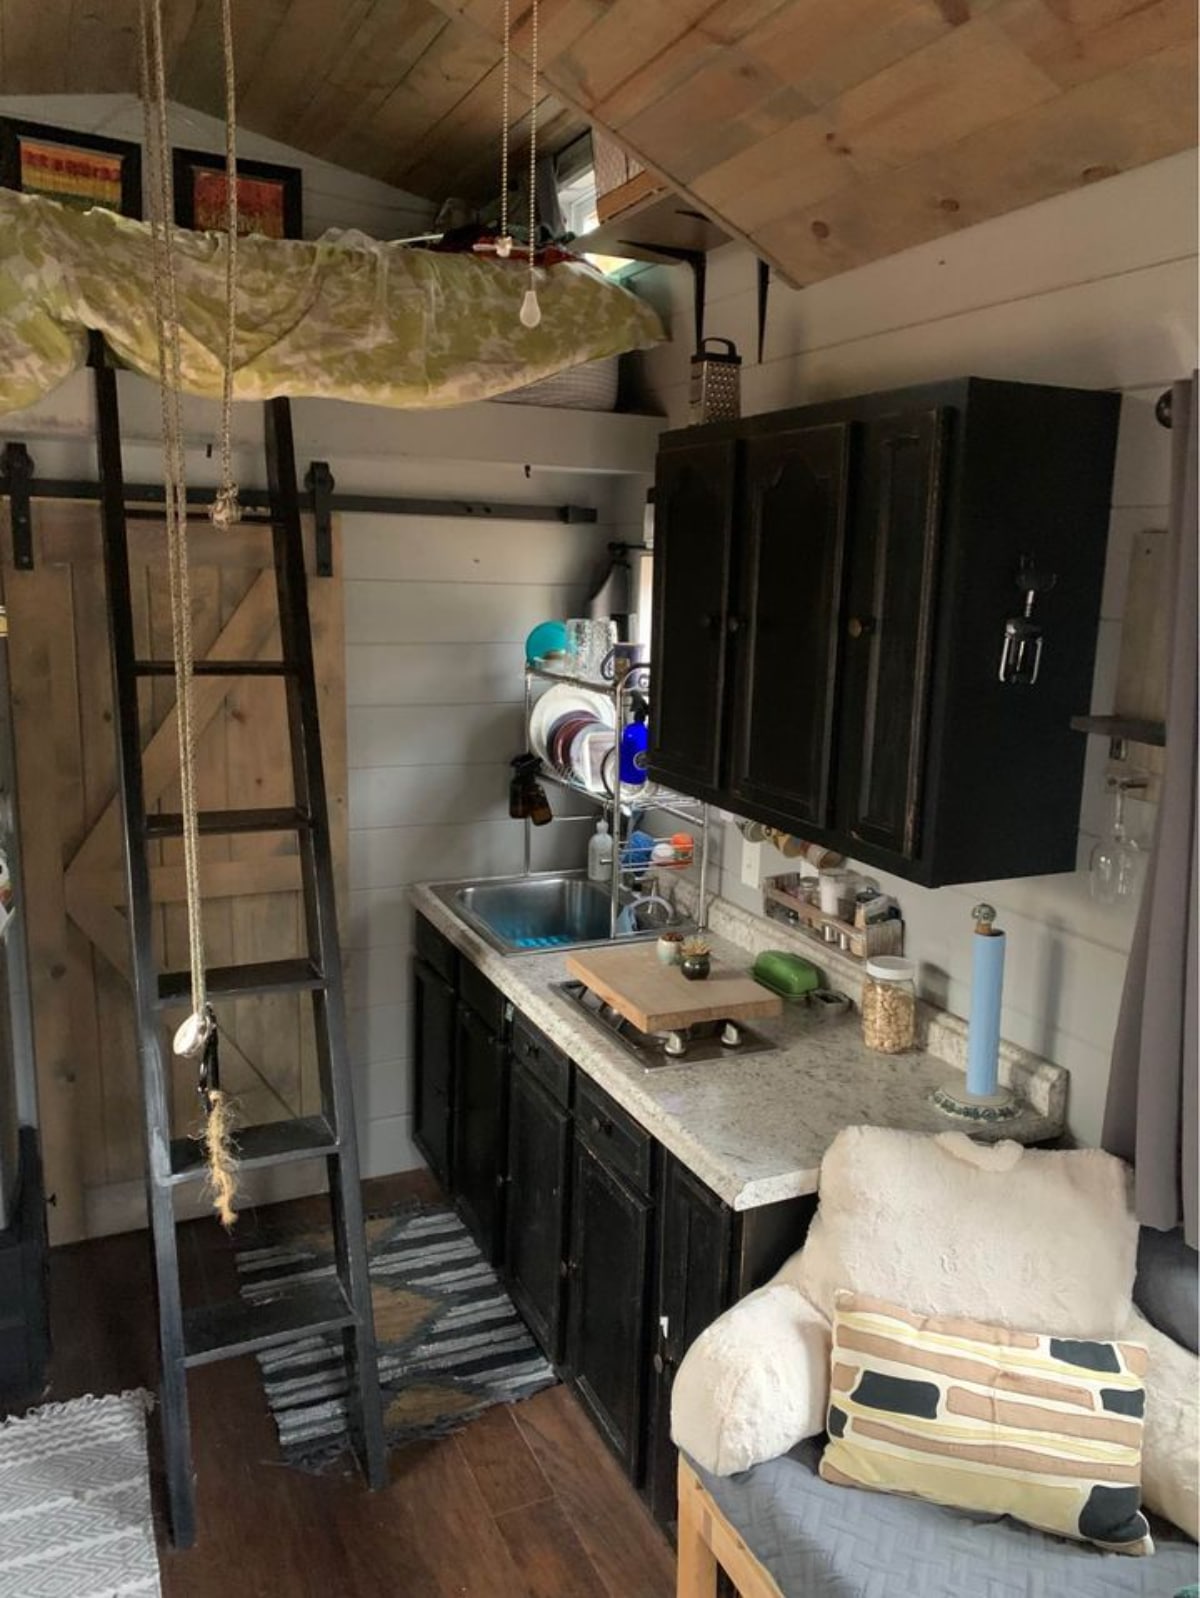 Kitchen area of 180 sf Adorable Tiny House on Wheels